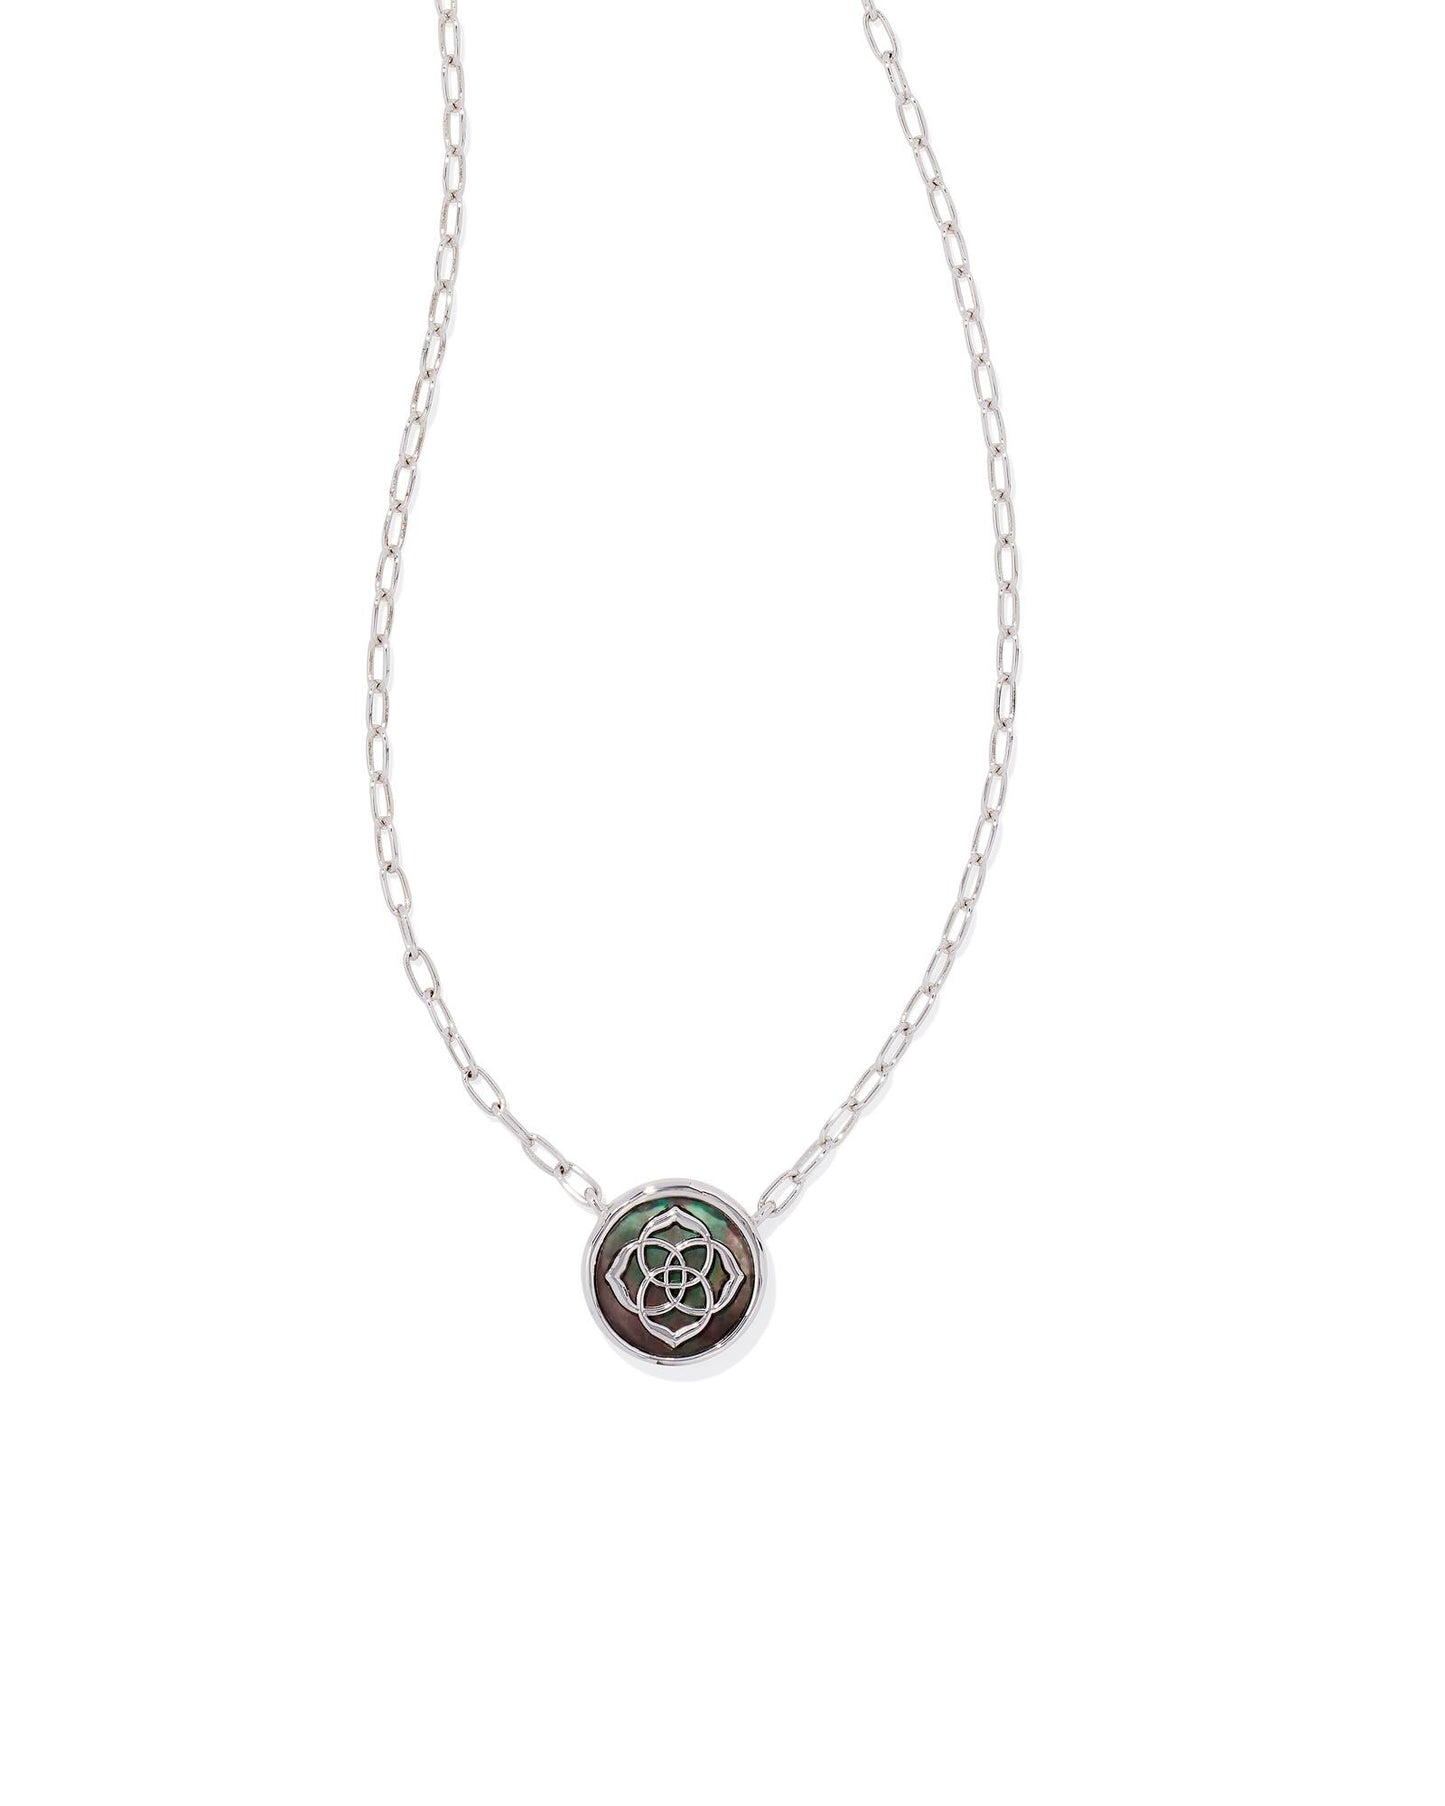 KS Stamped Dira Coin Pendant Necklace